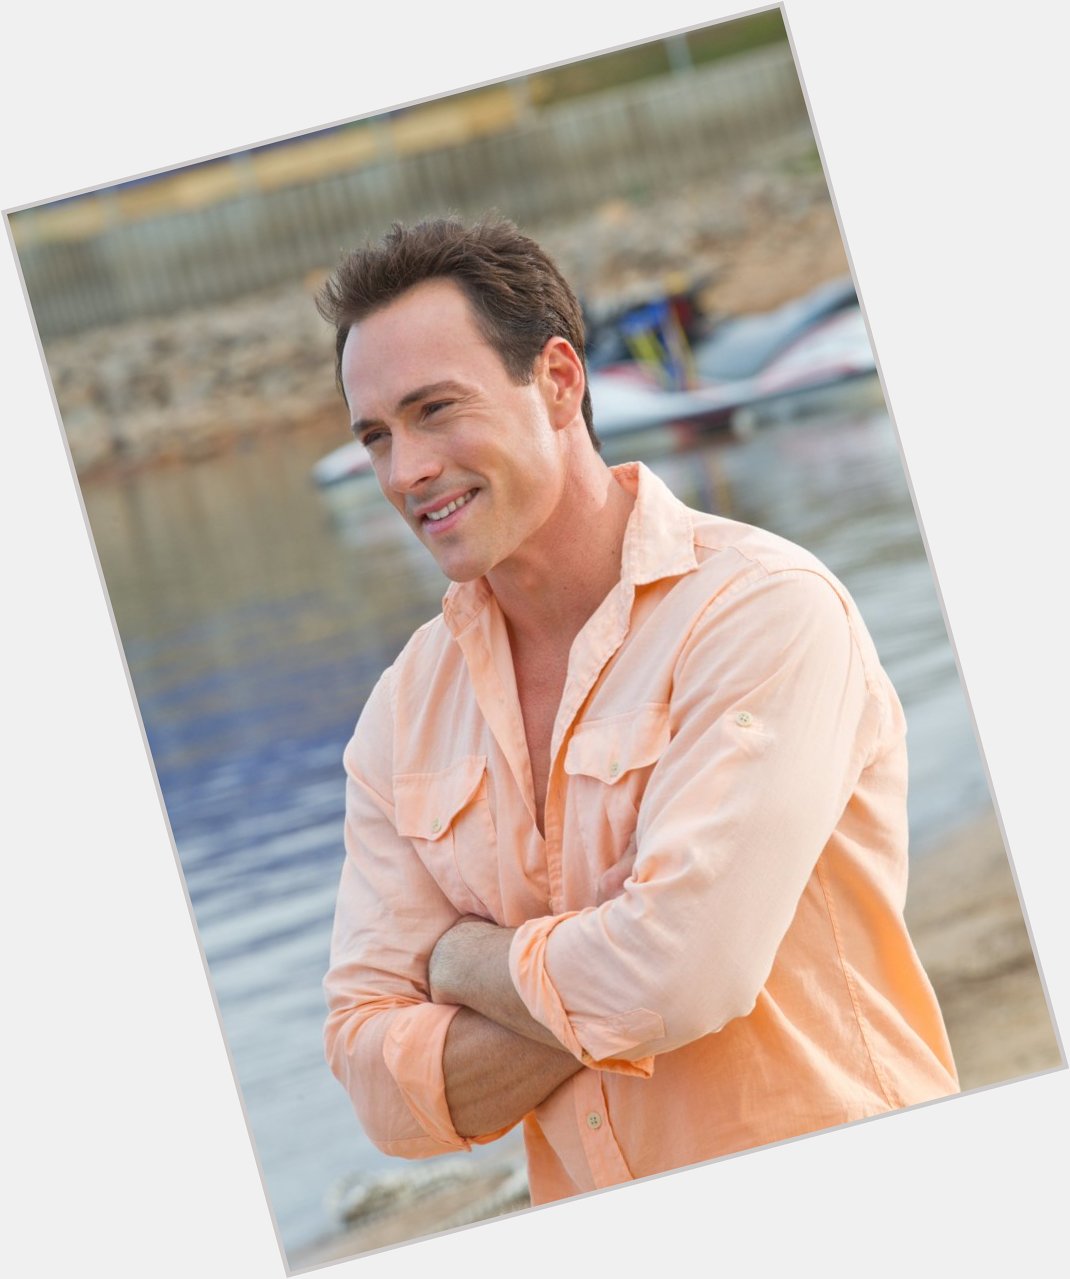 Happy birthday, Chris Klein! Today the american actor turns 40 years old, see profile at:  